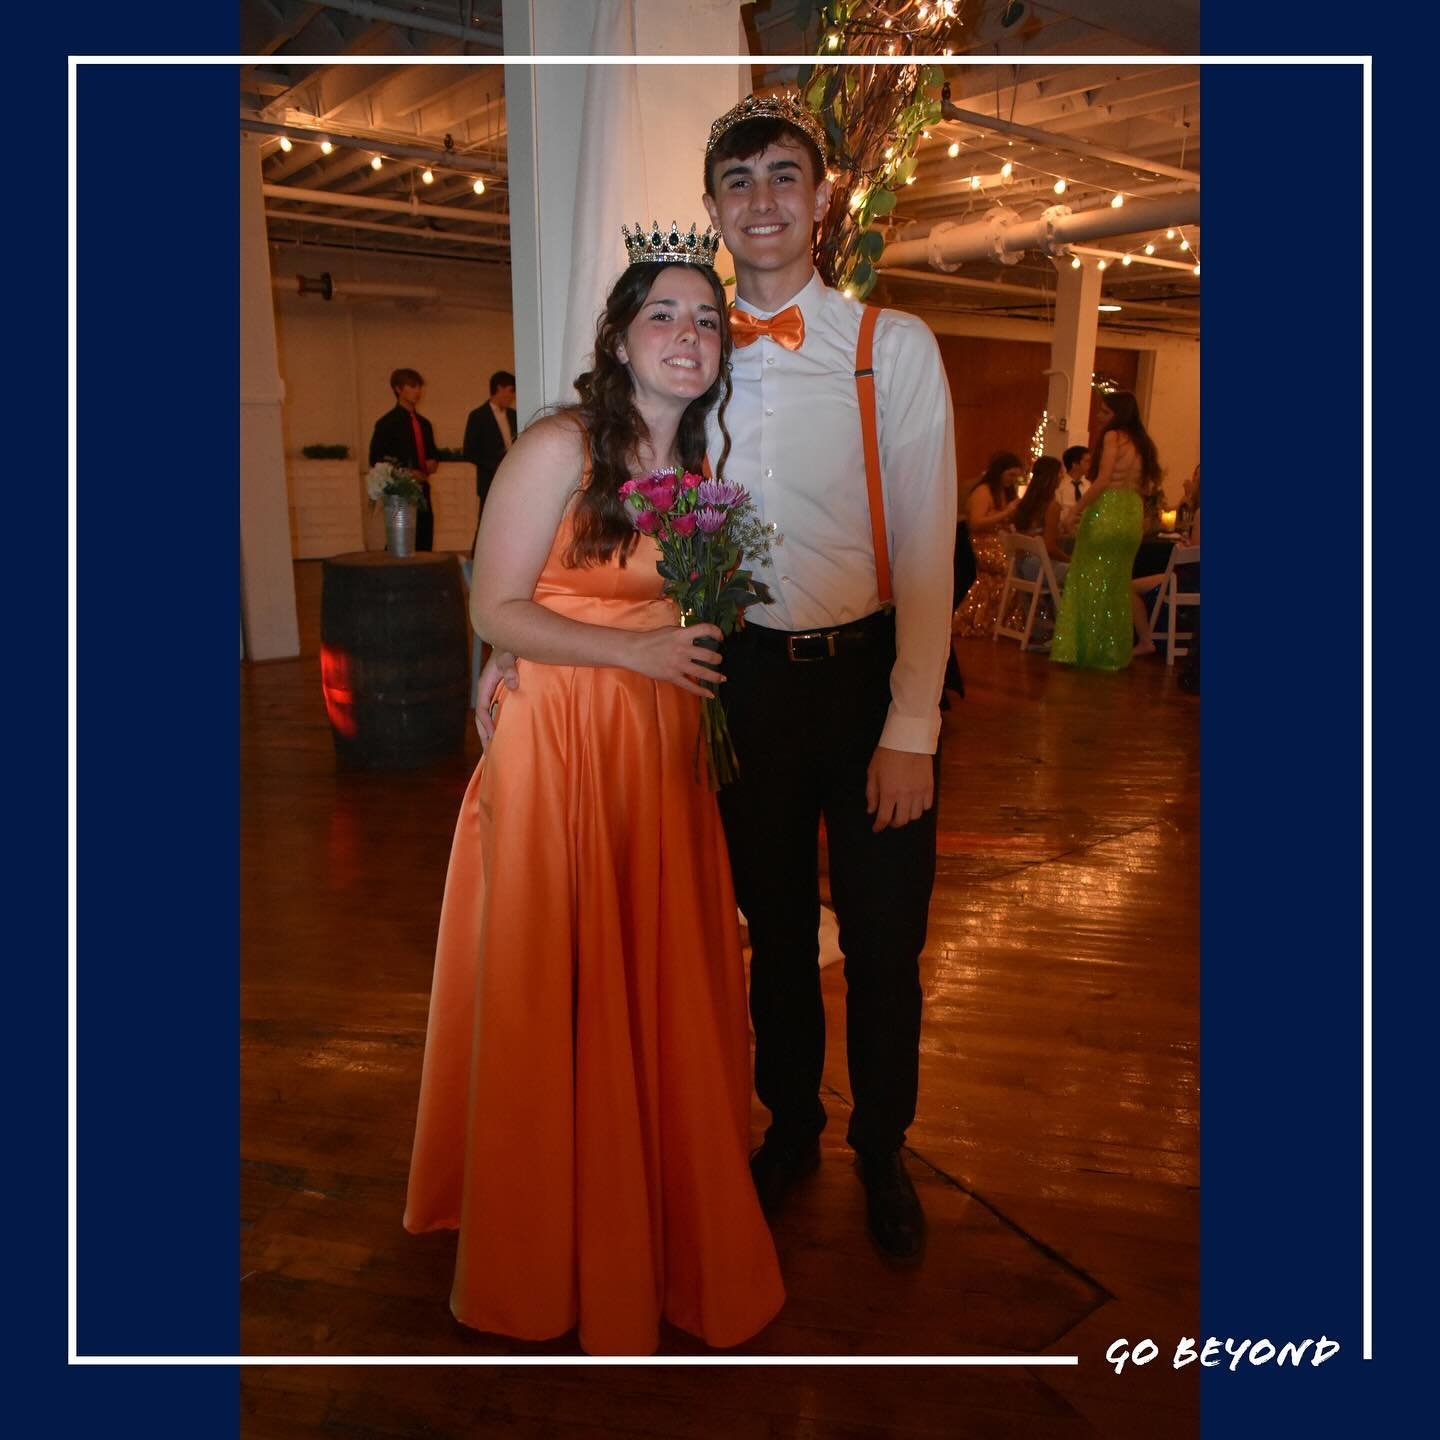 Last Saturday, the Juniors and Seniors enjoyed an Enchanted Forest evening at Prom.

Congratulations to Jacob Cornelius and Sadie Wachsmann for being named King &amp; Queen and Albert Hudepohl and Caroline Niese for being named Prince &amp; Princess!